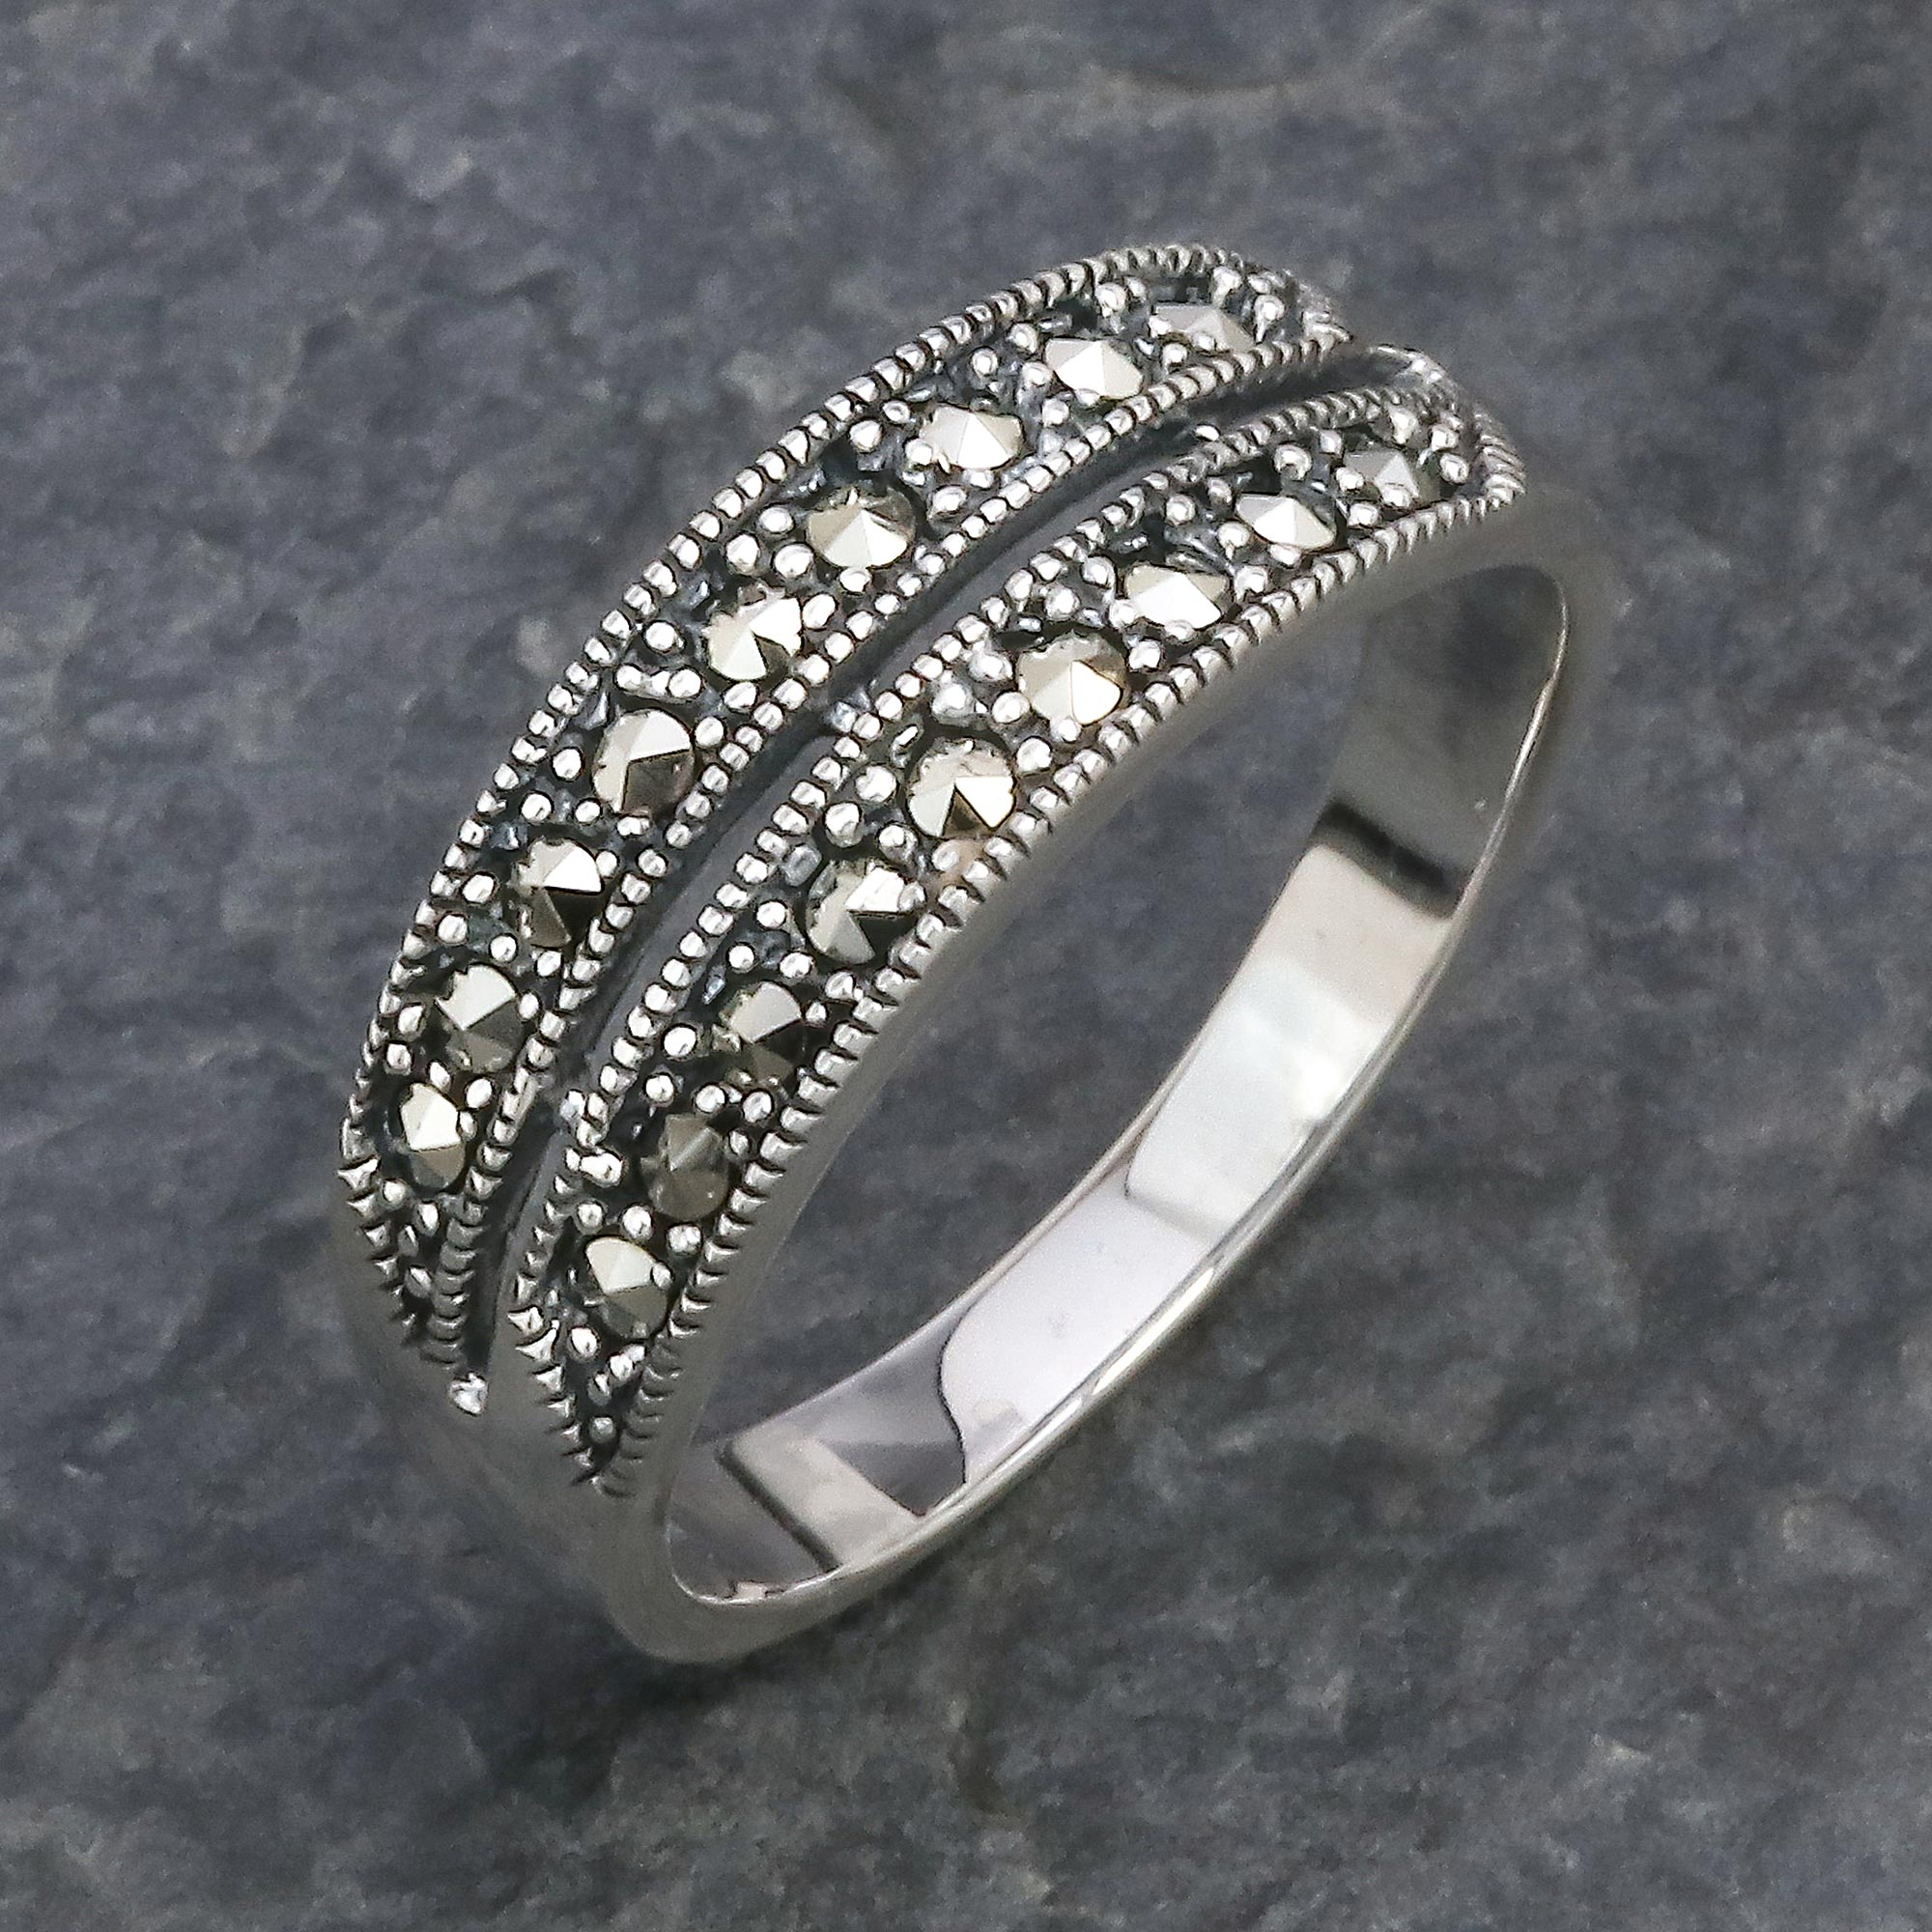 Handcrafted Silver and Marcasite Ring from Thailand - River of Starlight |  NOVICA